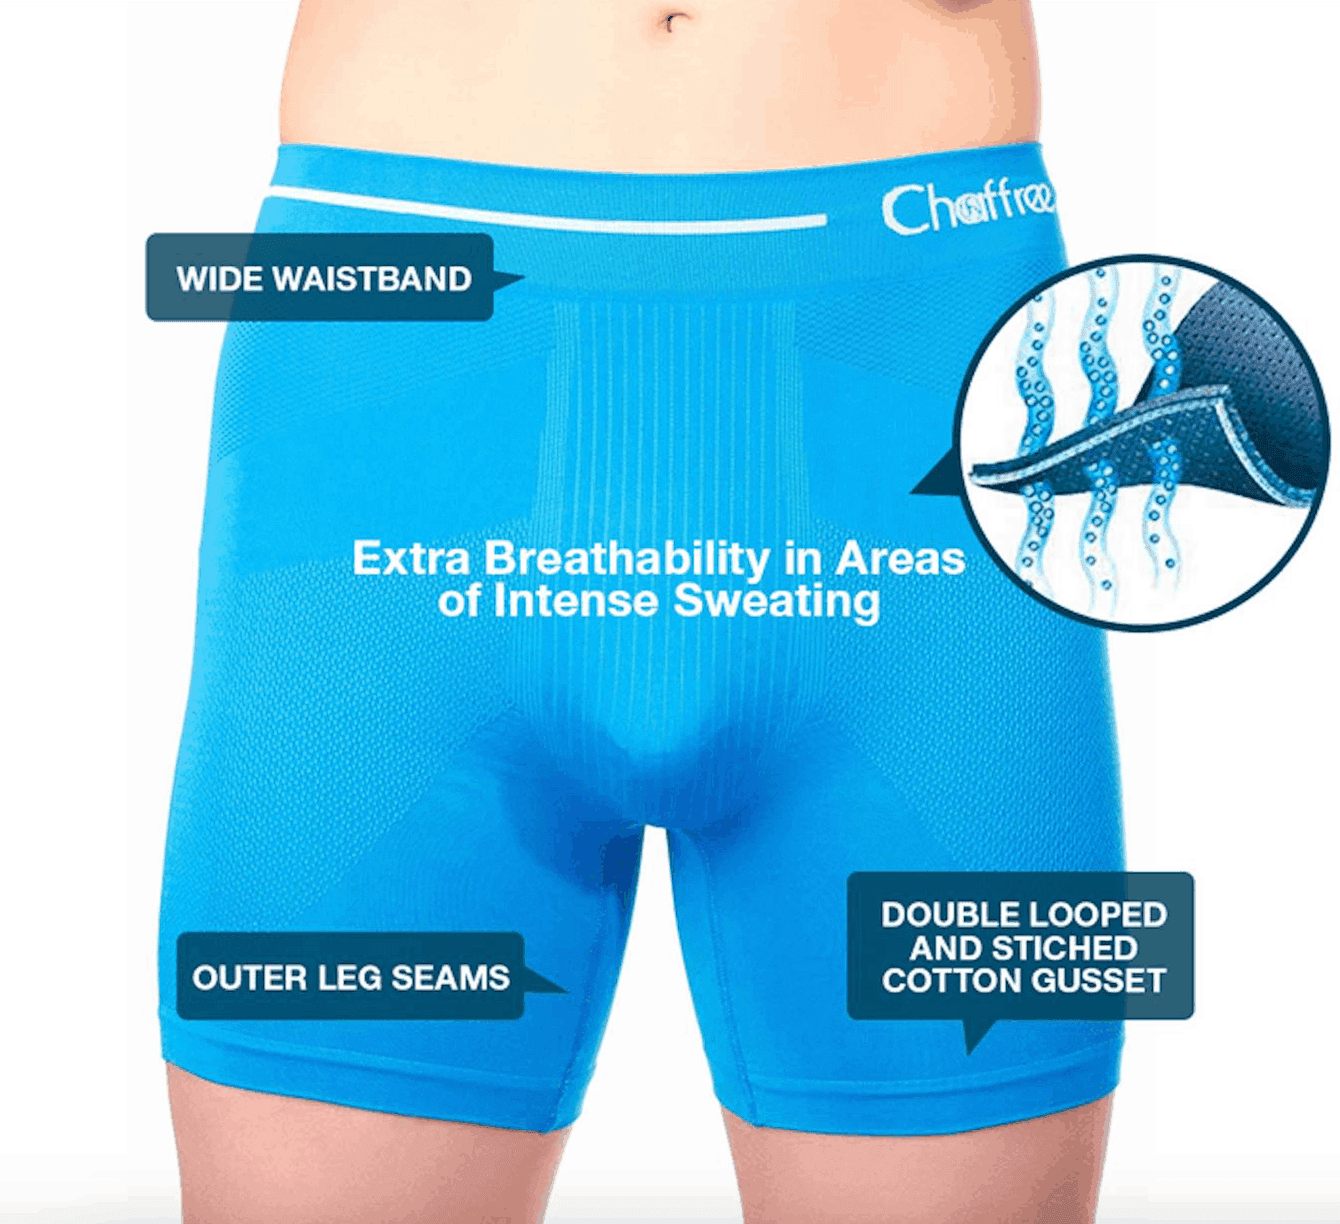 The best anti-chafe shorts to buy for sweaty summer days - RSVP Live